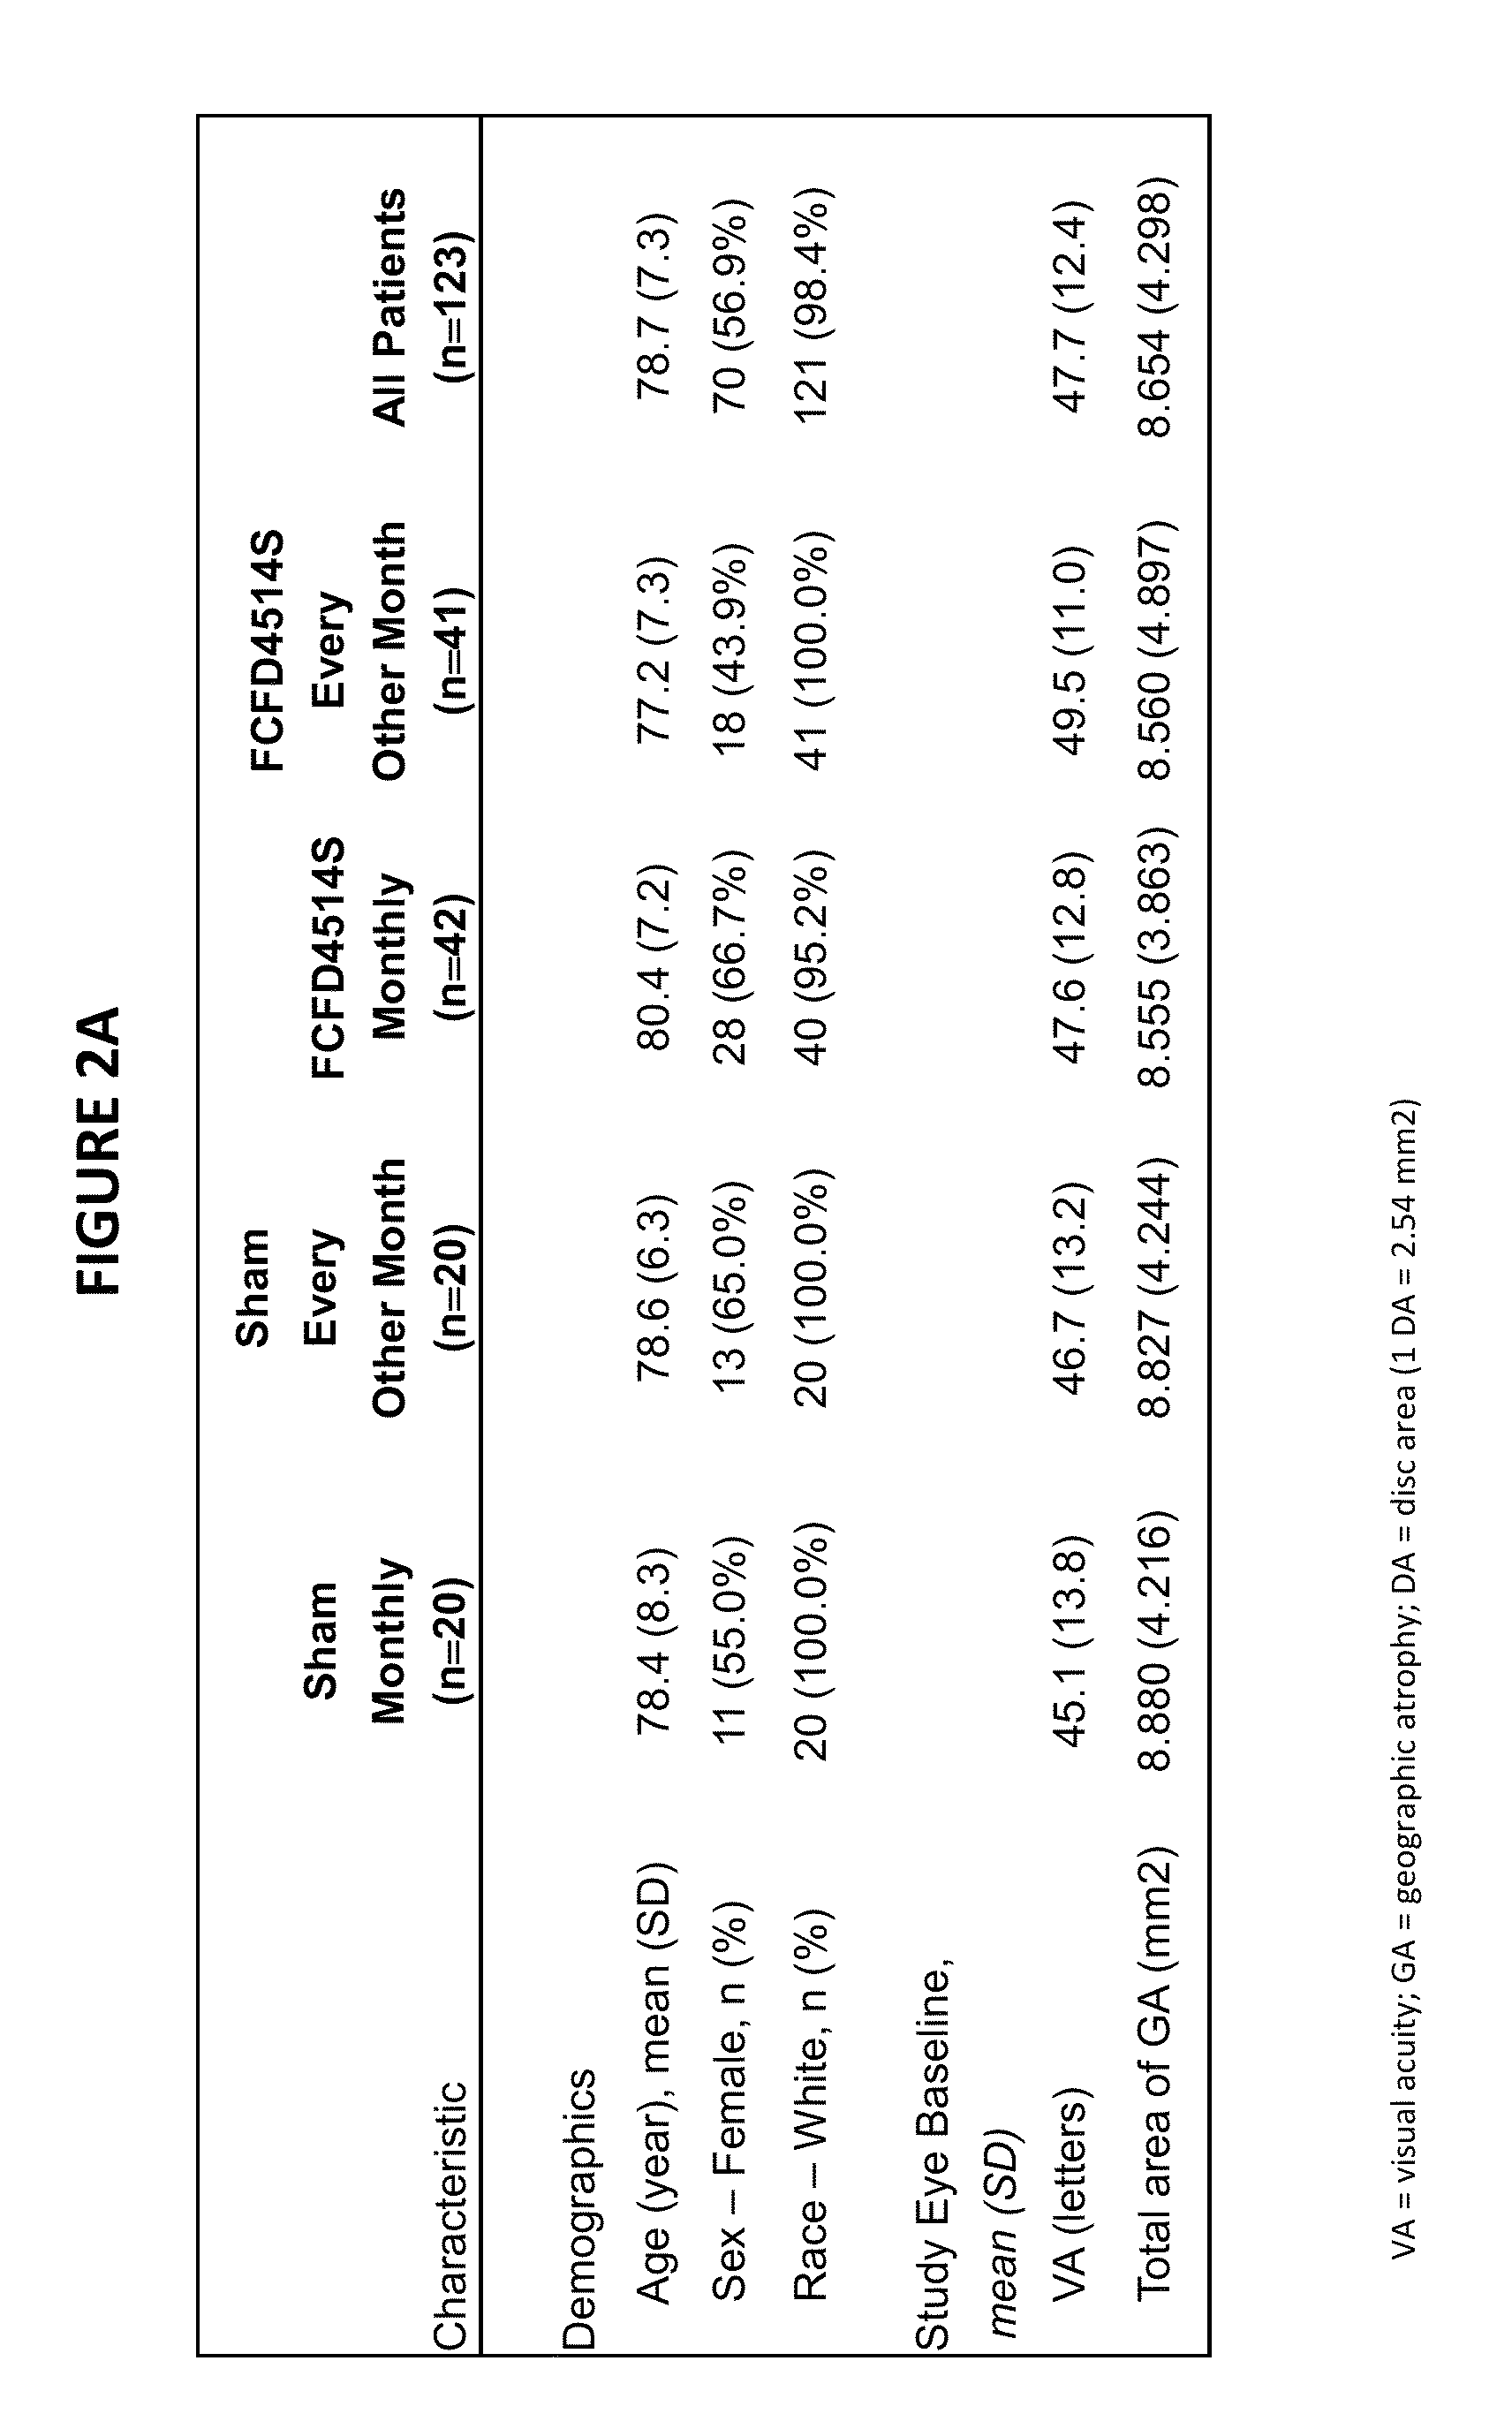 Compositions and method for treating compliment-associated conditions